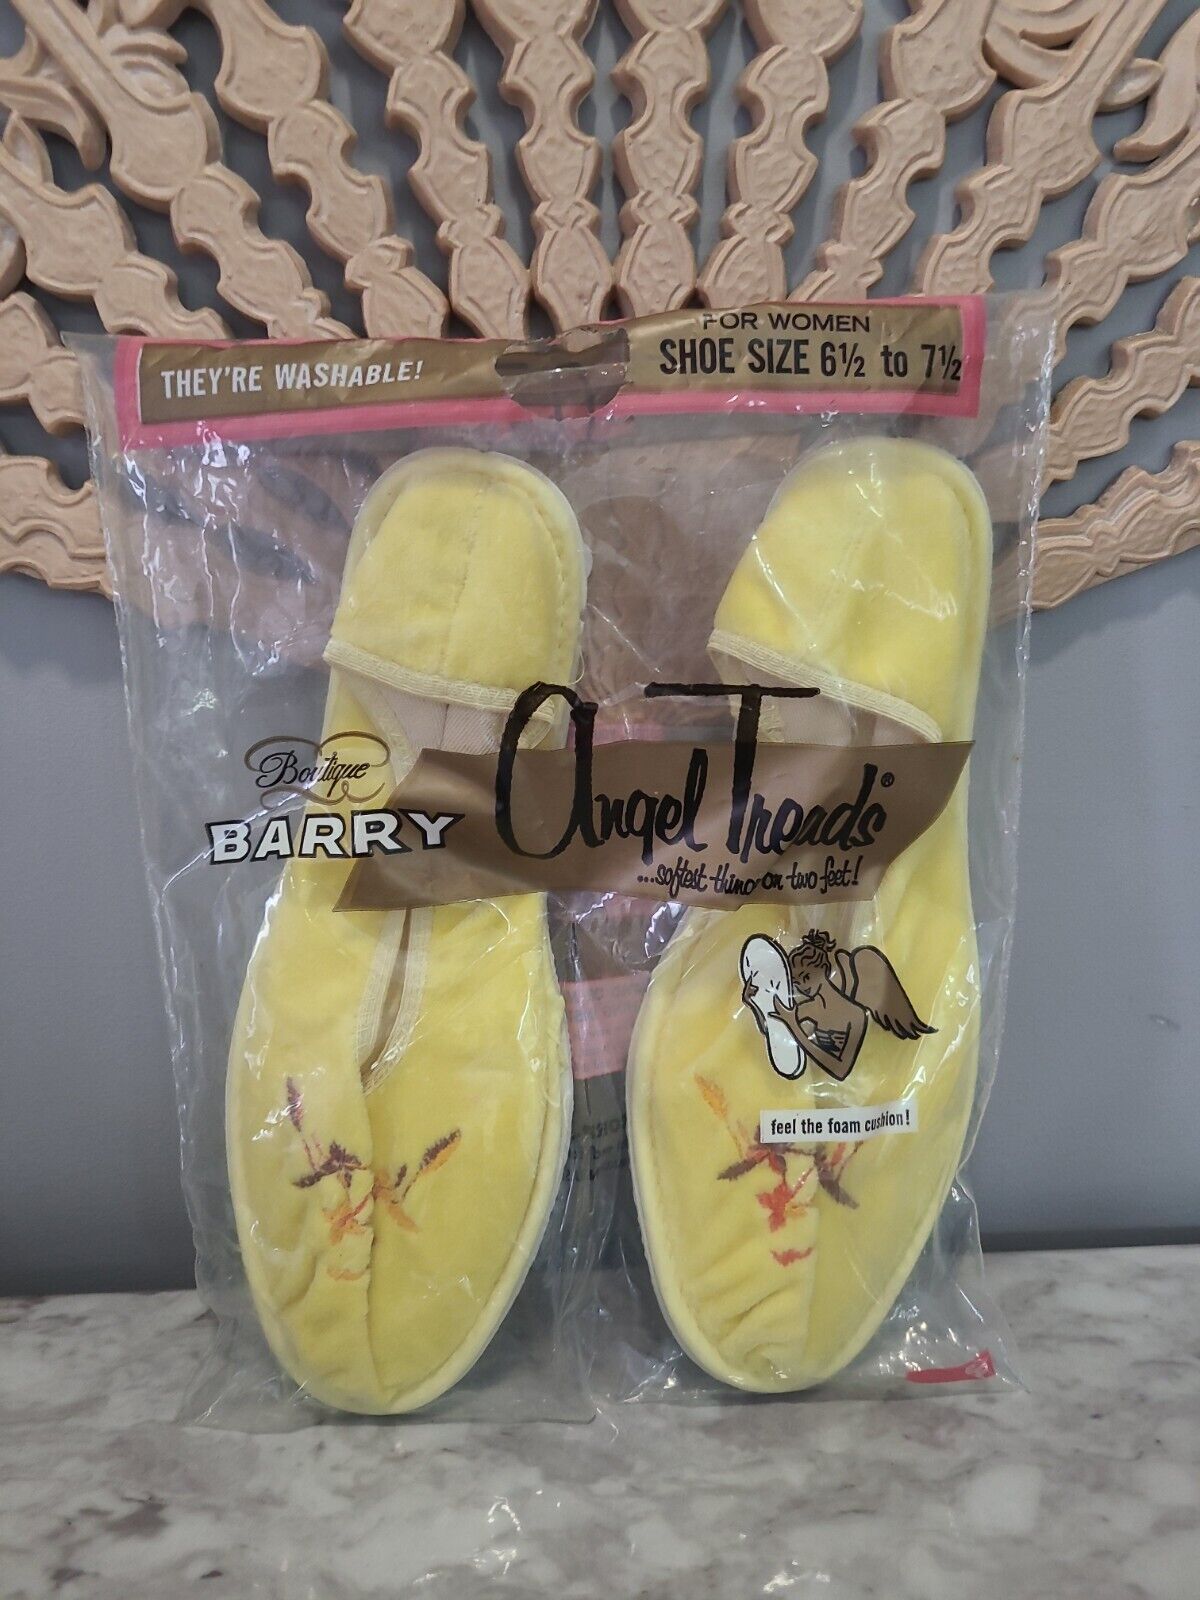 Vintage House Slippers Angel Treads Boutique Barry 7.5 Unused Original Packaging